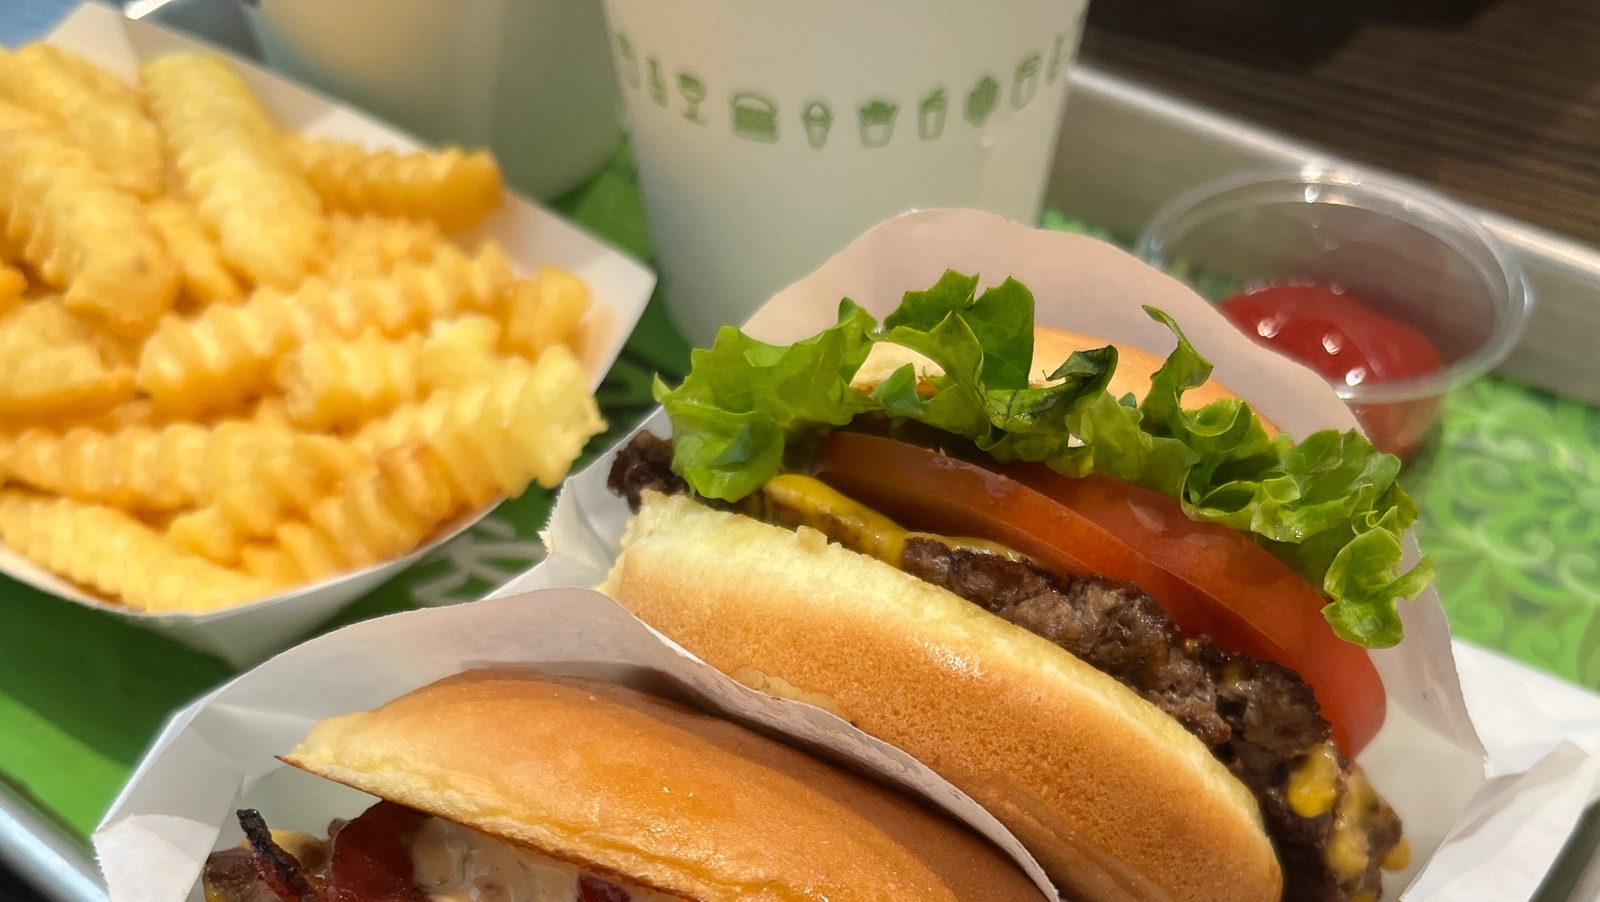 https://www.mashed.com/img/gallery/what-it-is-like-to-eat-at-the-first-shake-shack-and-how-that-has-changed/l-intro-1687266398.jpg